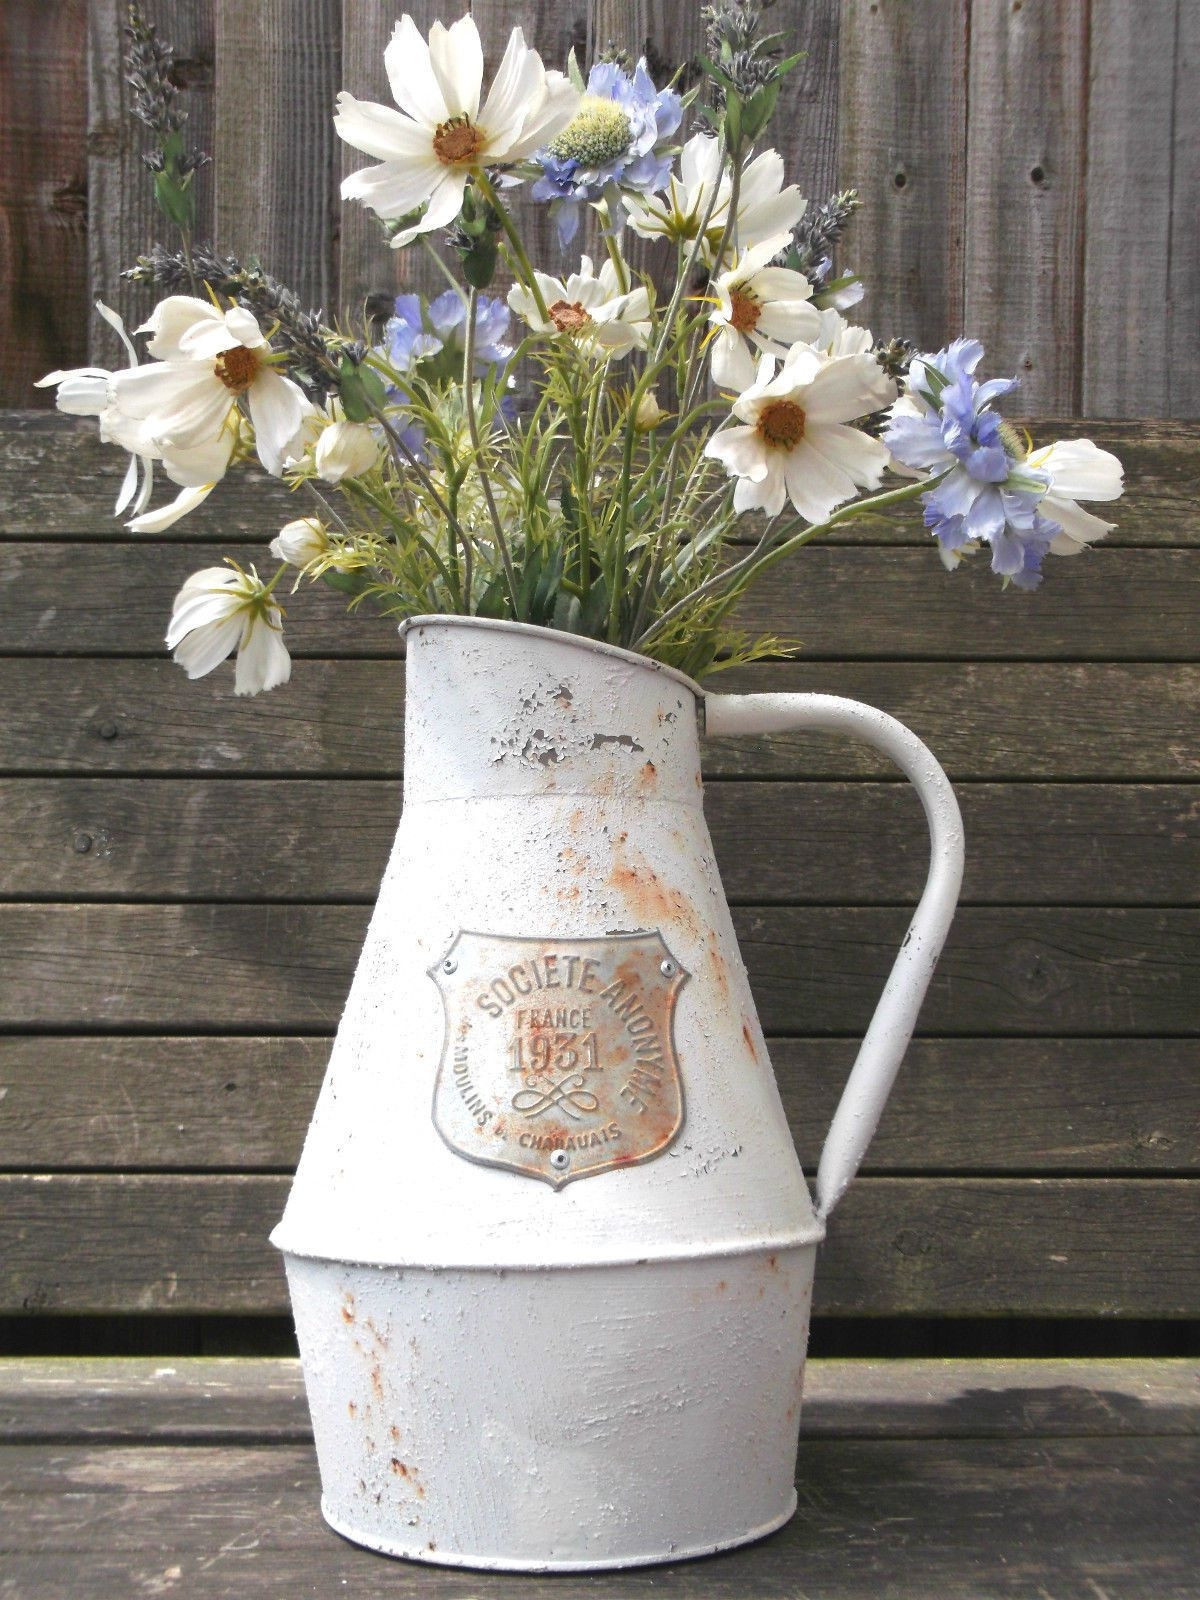 19 Recommended Rustic Metal Flower Vase 2024 free download rustic metal flower vase of galvanized flower vase collection rustic wall de rustic hanging in galvanized flower vase pictures french flower bucket h vases galvanized french vase tin bucketi